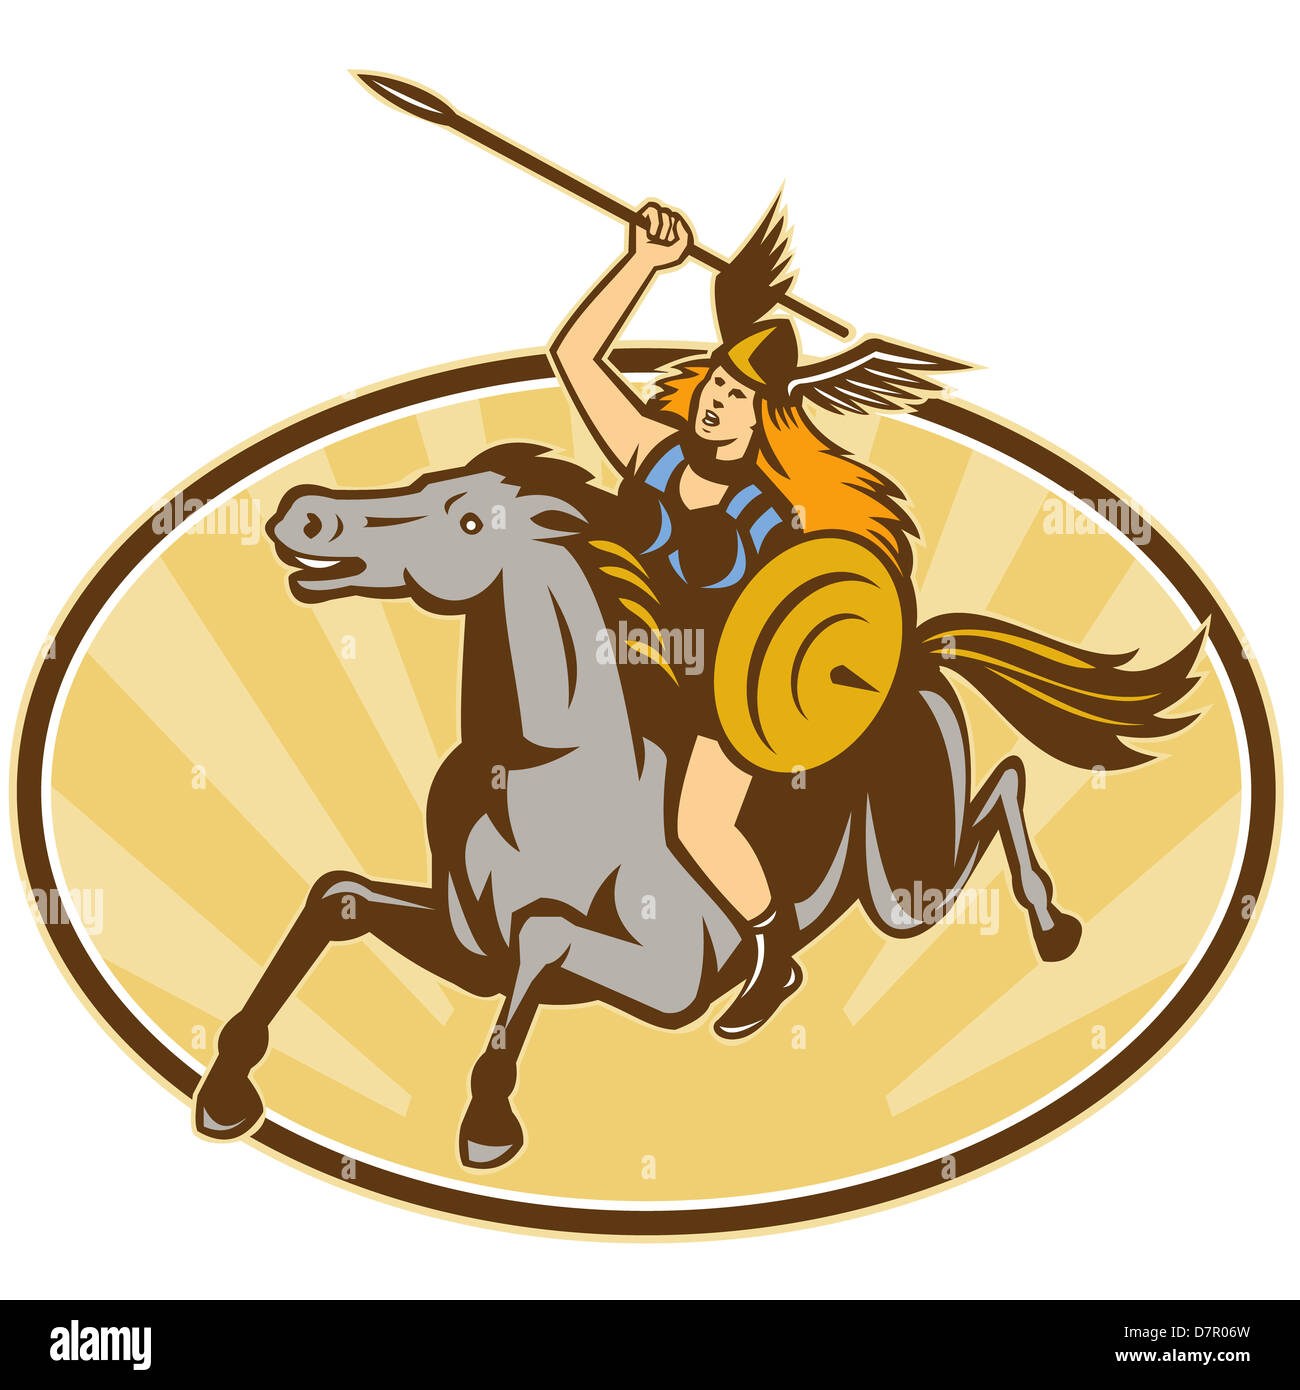 Illustration of valkyrie of Norse mythology female rider warriors riding horse with spear done in retro style. Stock Photo